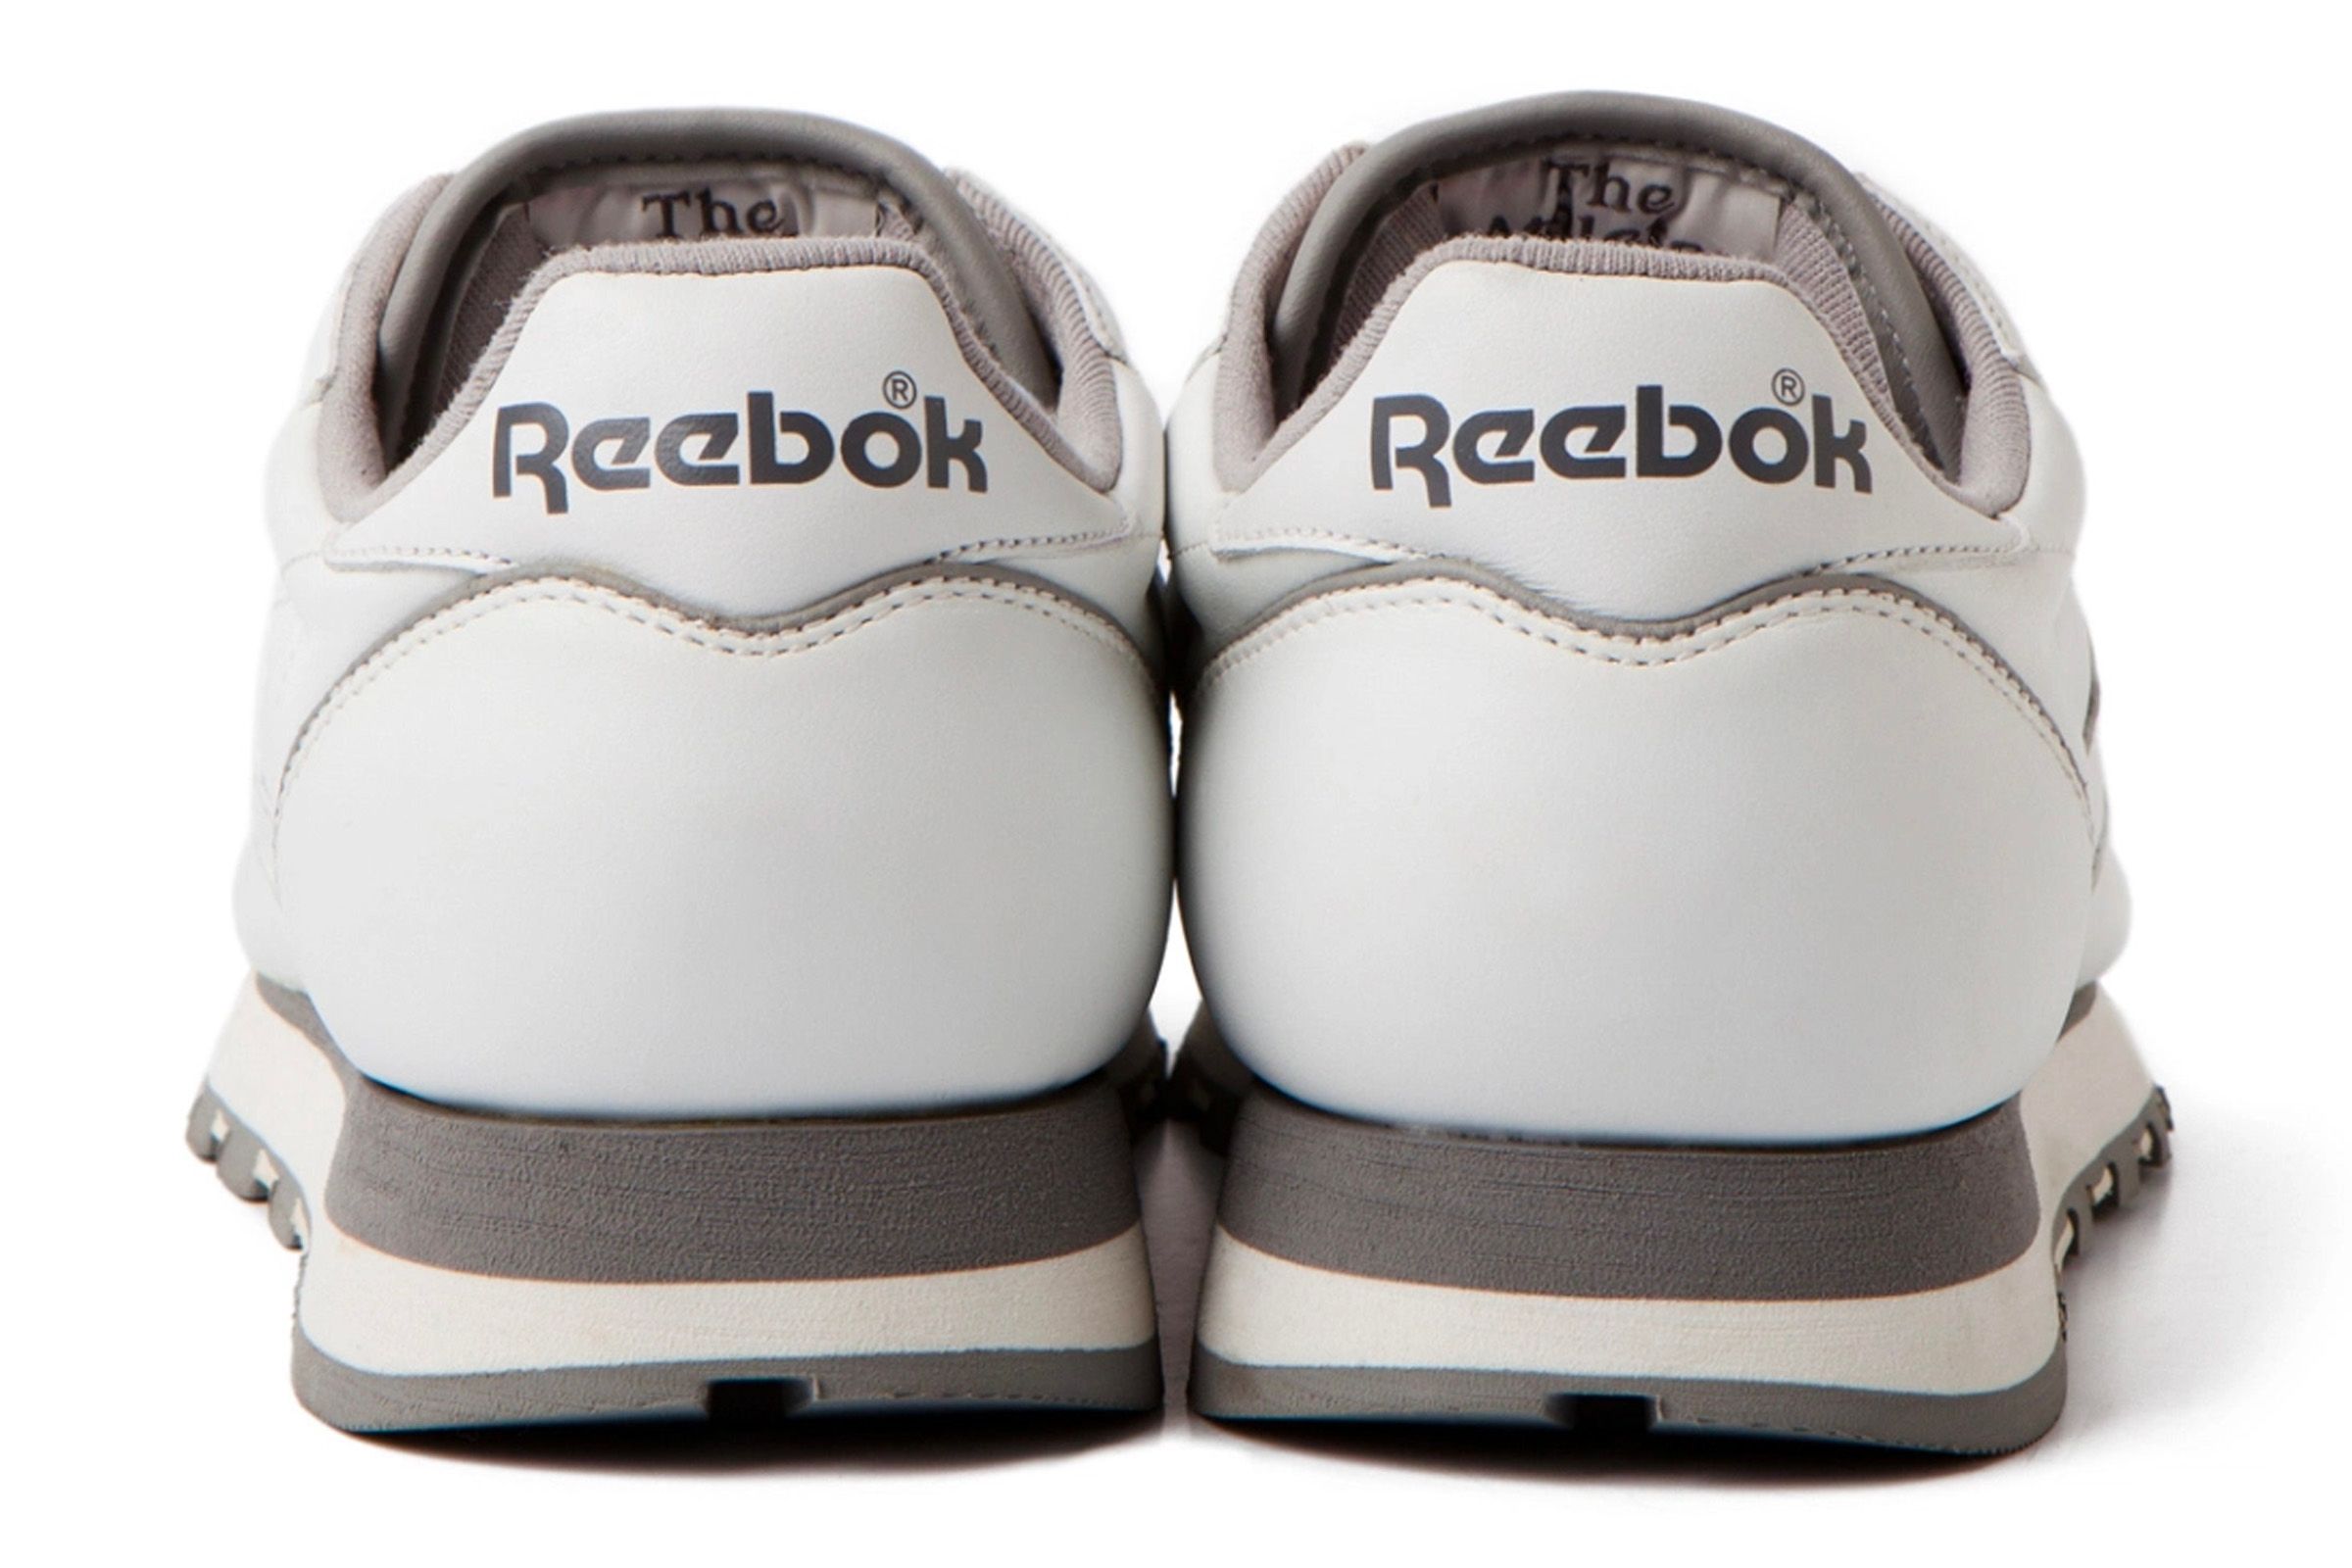 Adidas Confirms Reebok Will Be Sold Soon